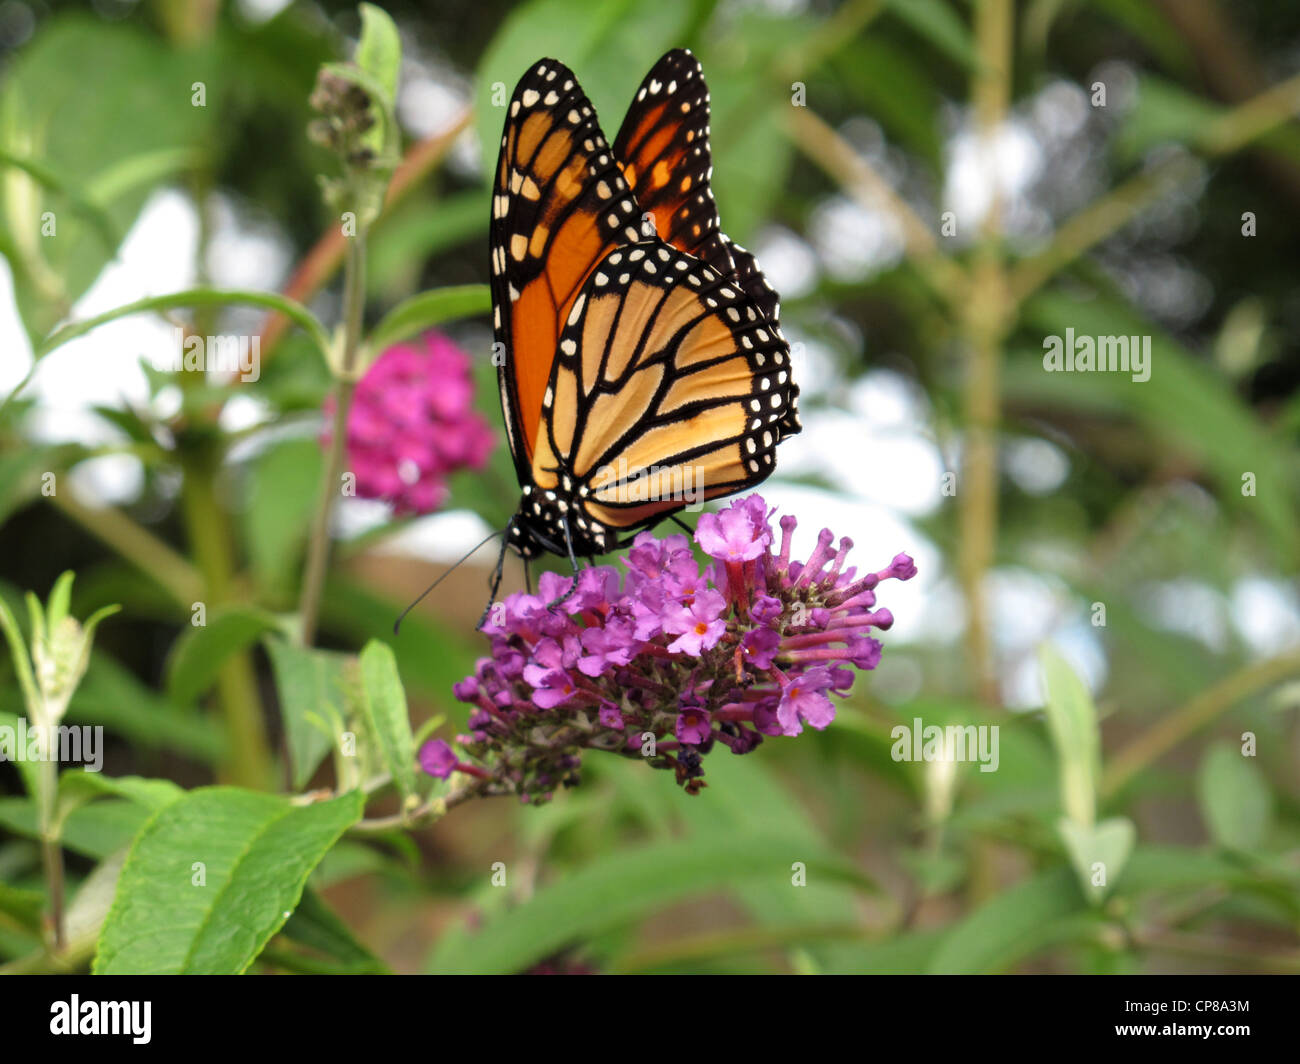 Monarch butterfly. Stock Photo